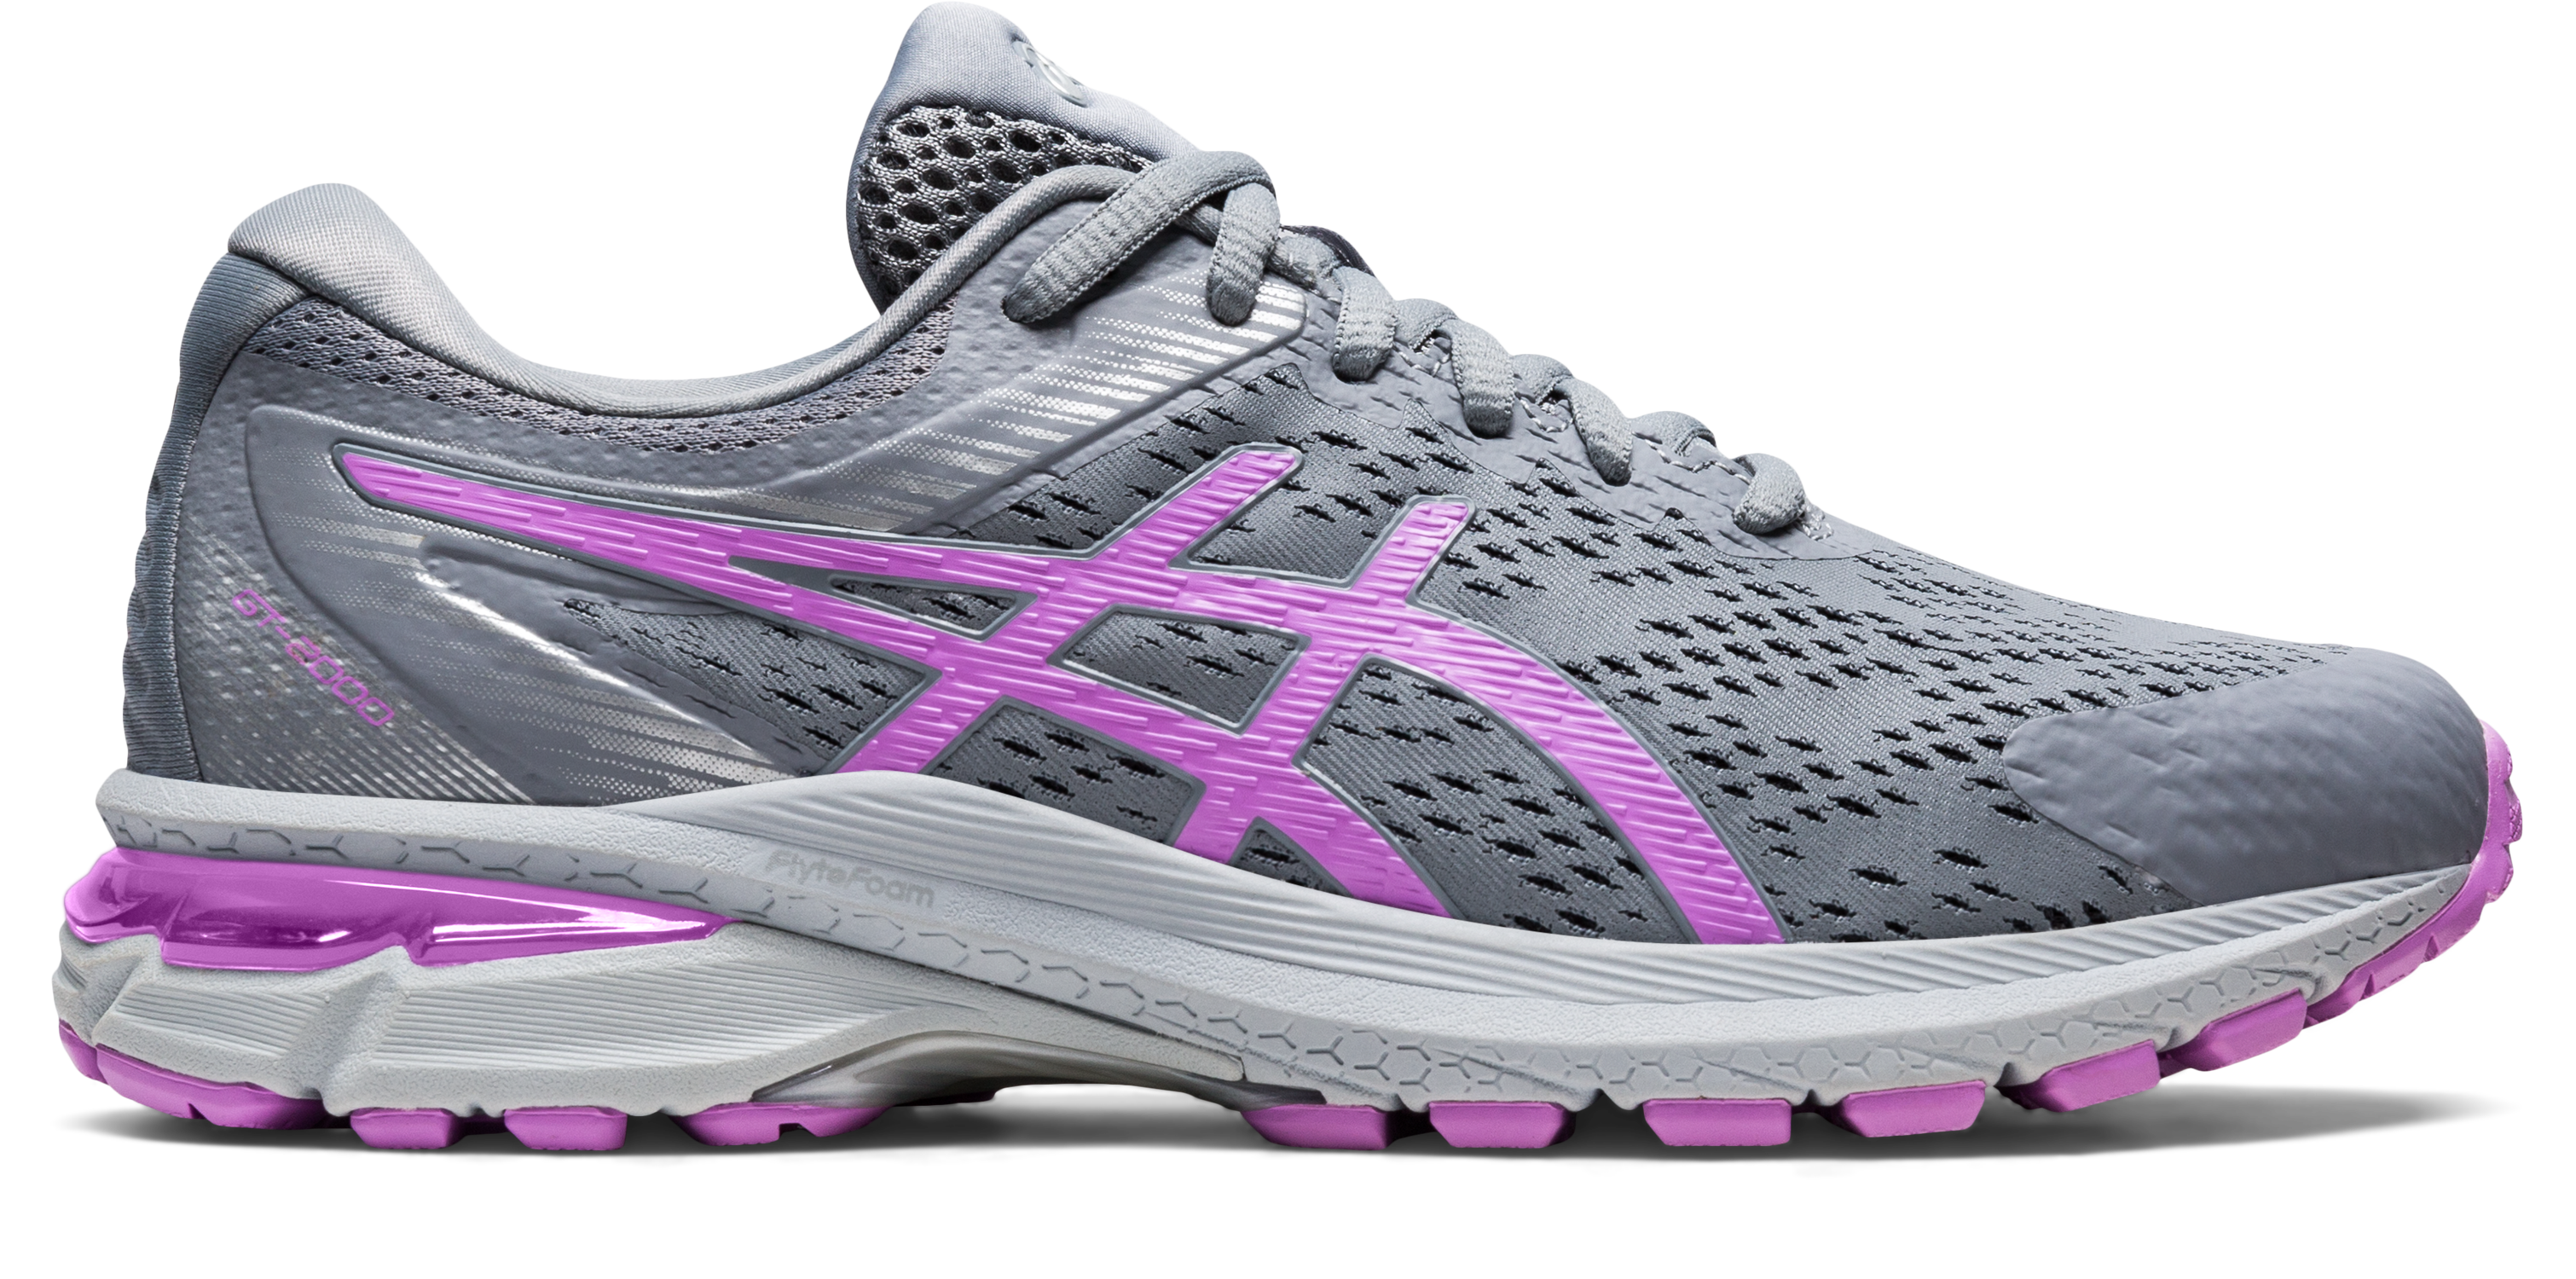 A Guide to the Best ASICS Shoes for Walking | ASICS